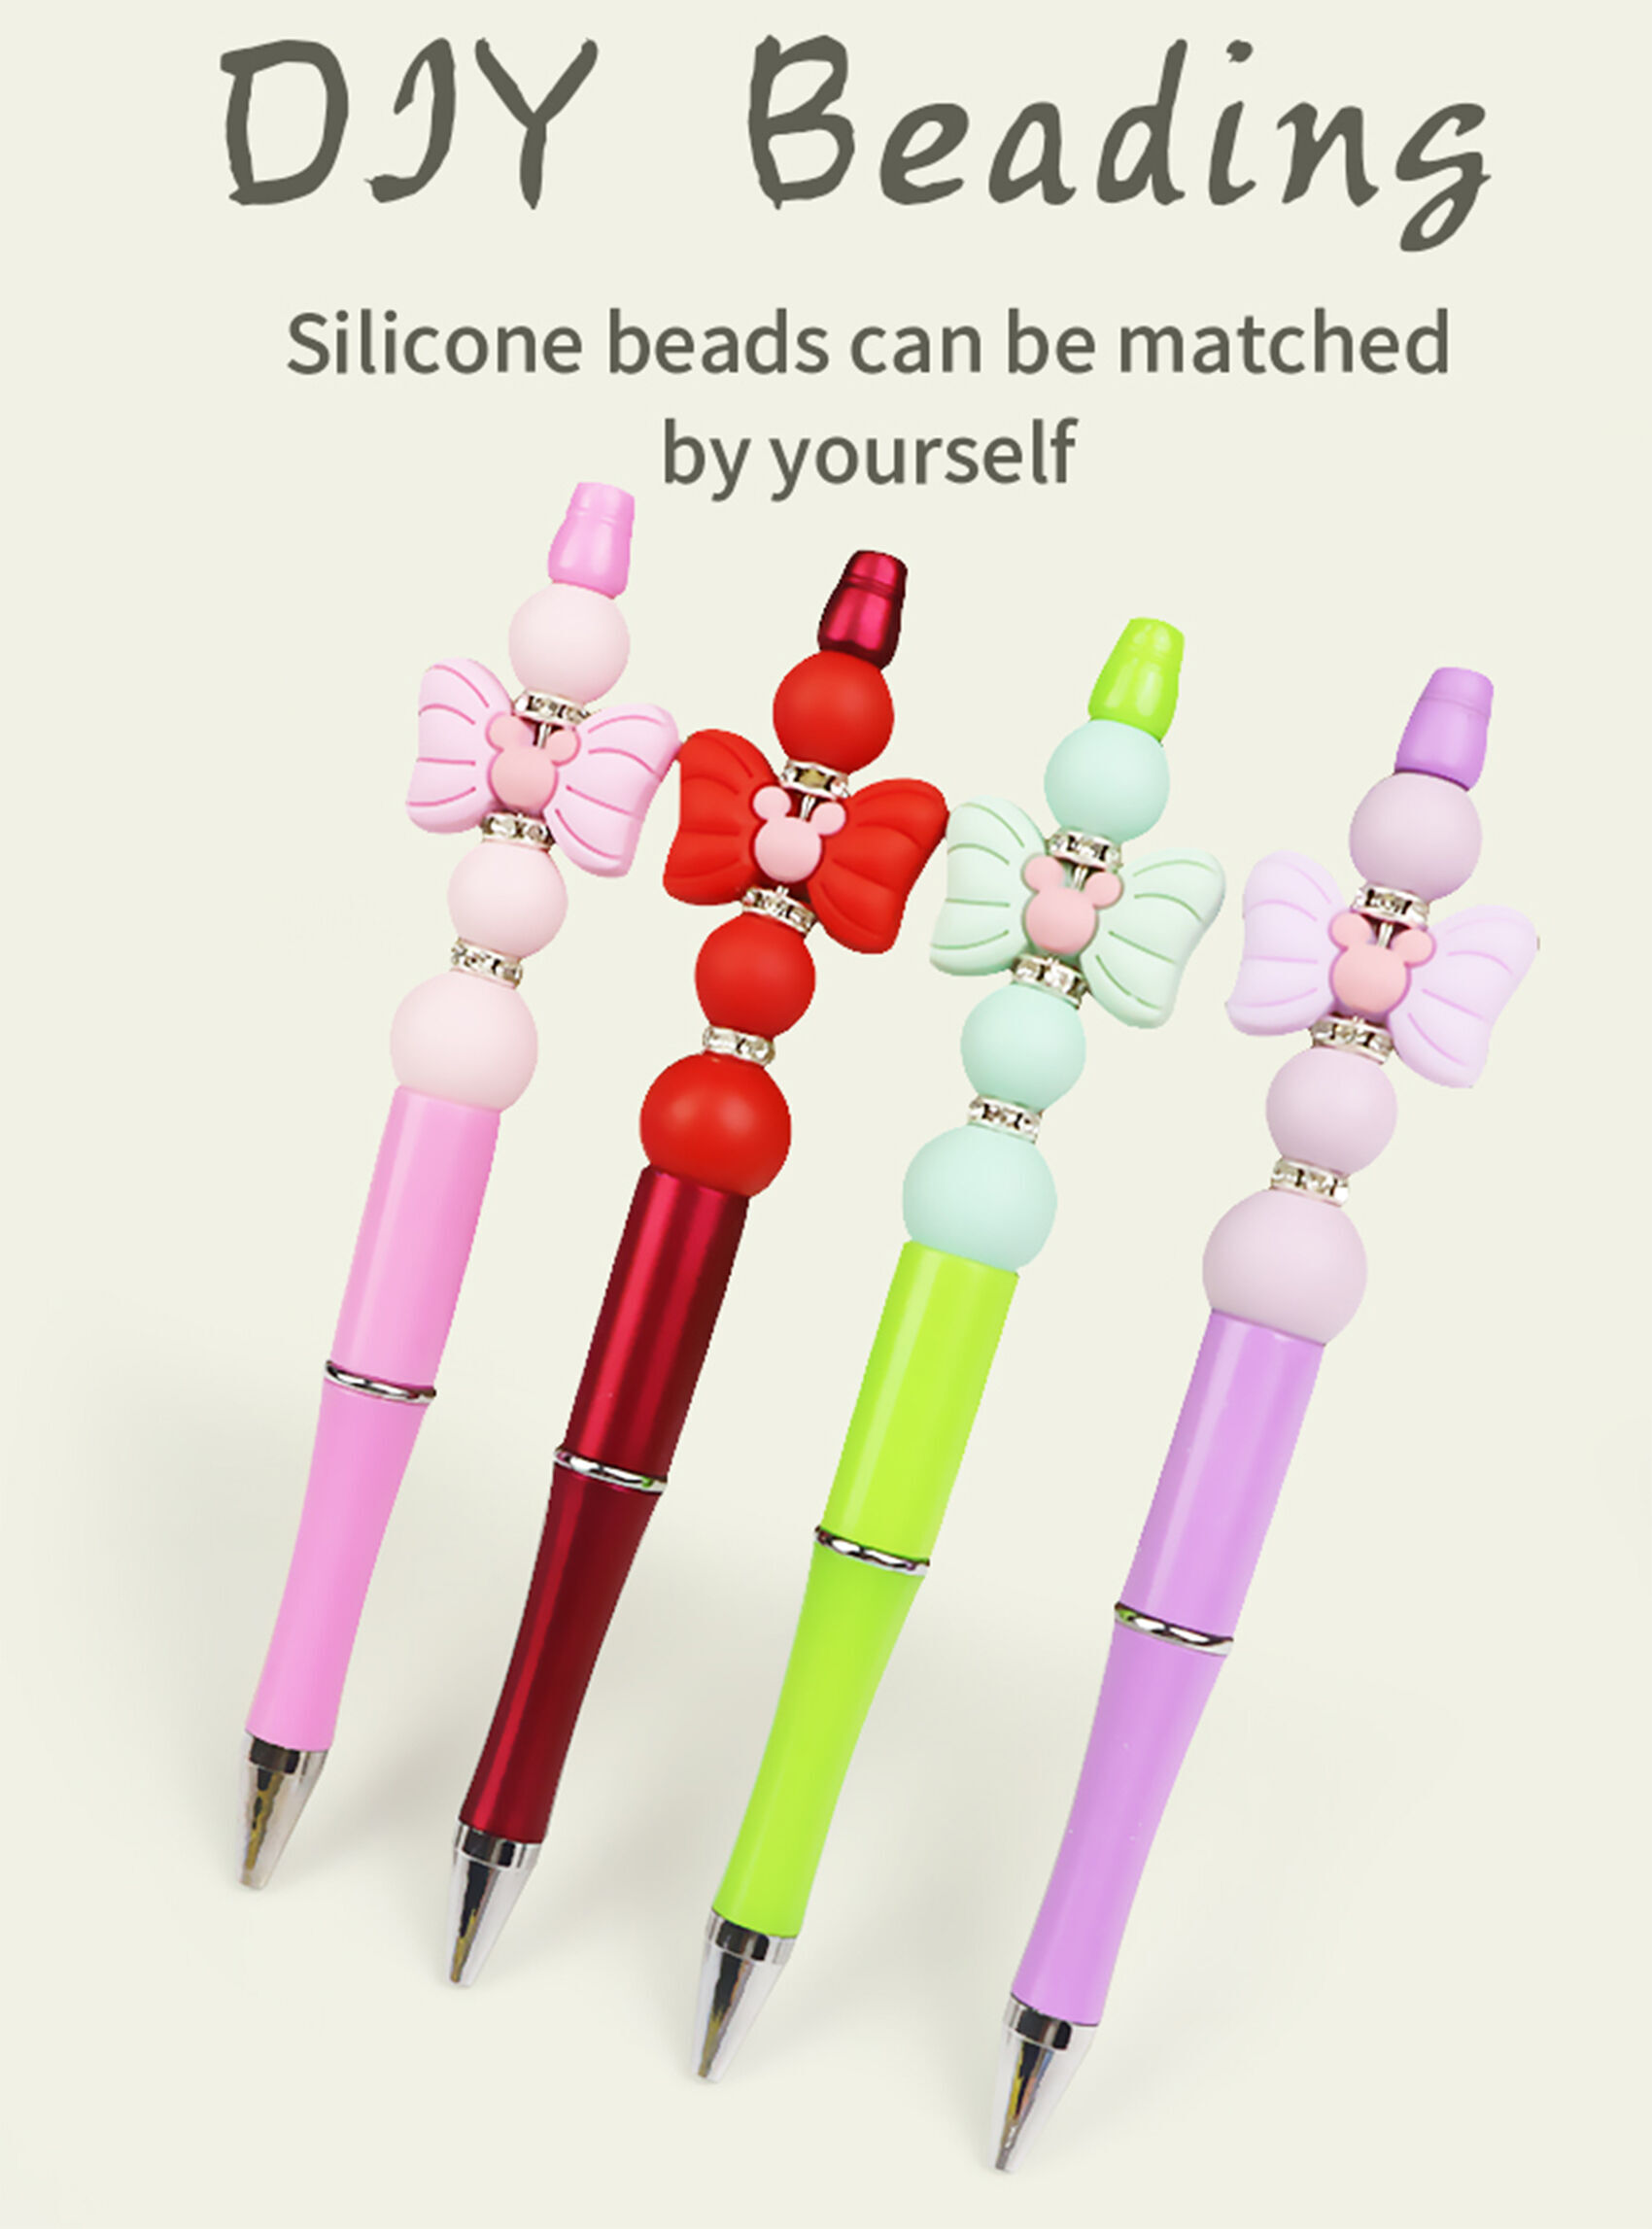 Wholesale Customizable USA Beaded 0.38 Mm Ballpoint Pen For DIY, Work, And  Crafts From Water2018, $0.62